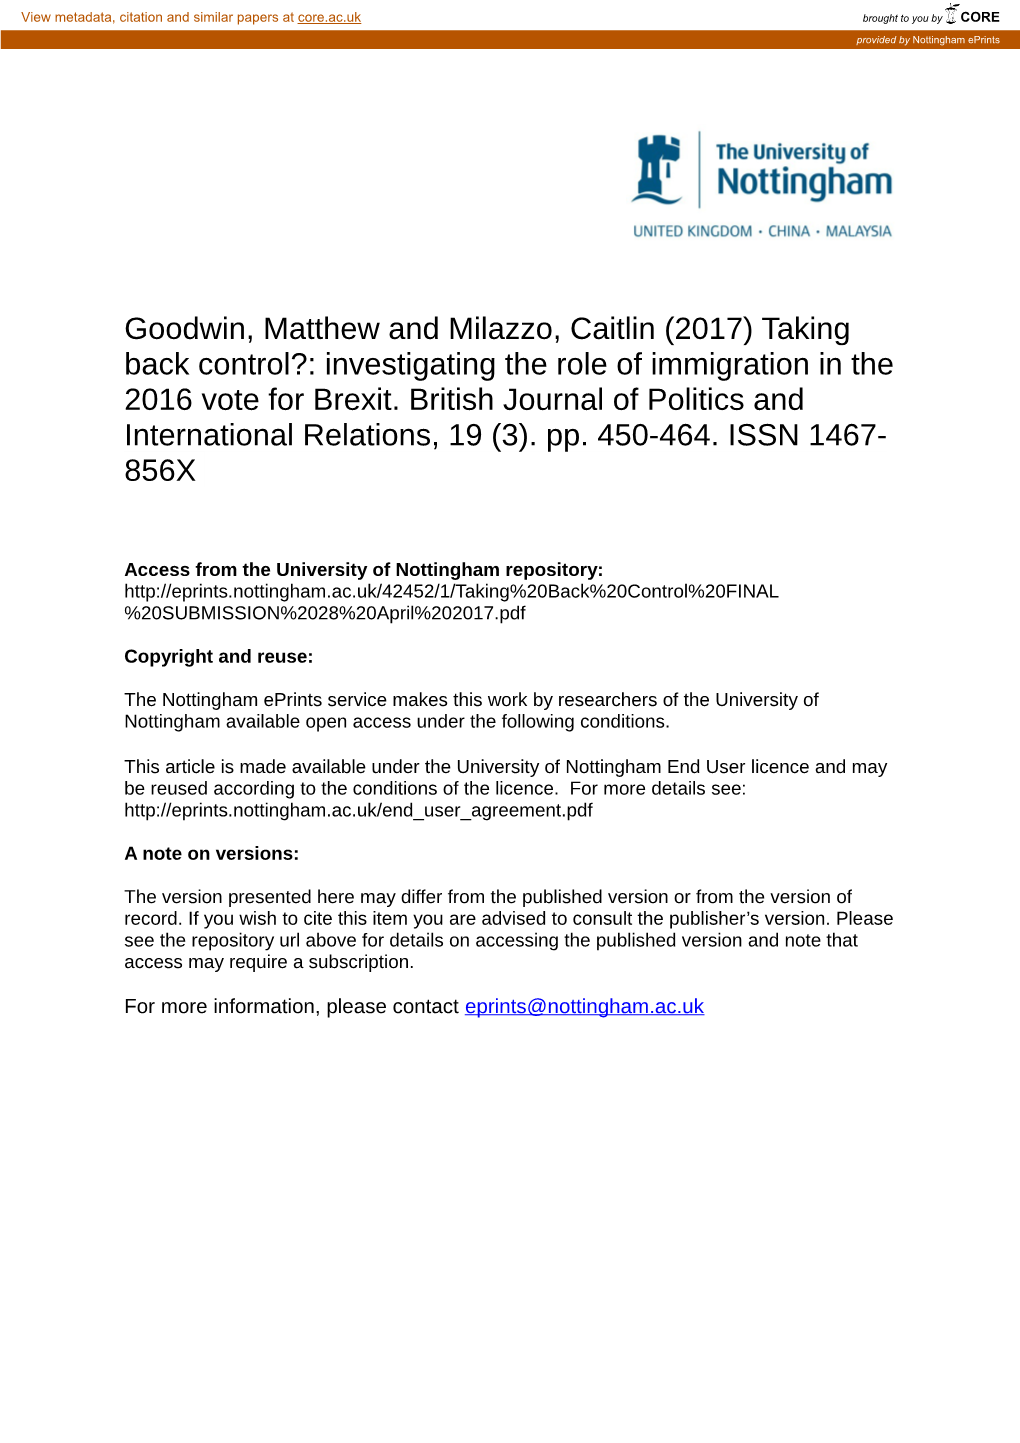 Goodwin, Matthew and Milazzo, Caitlin (2017) Taking Back Control?: Investigating the Role of Immigration in the 2016 Vote for Brexit